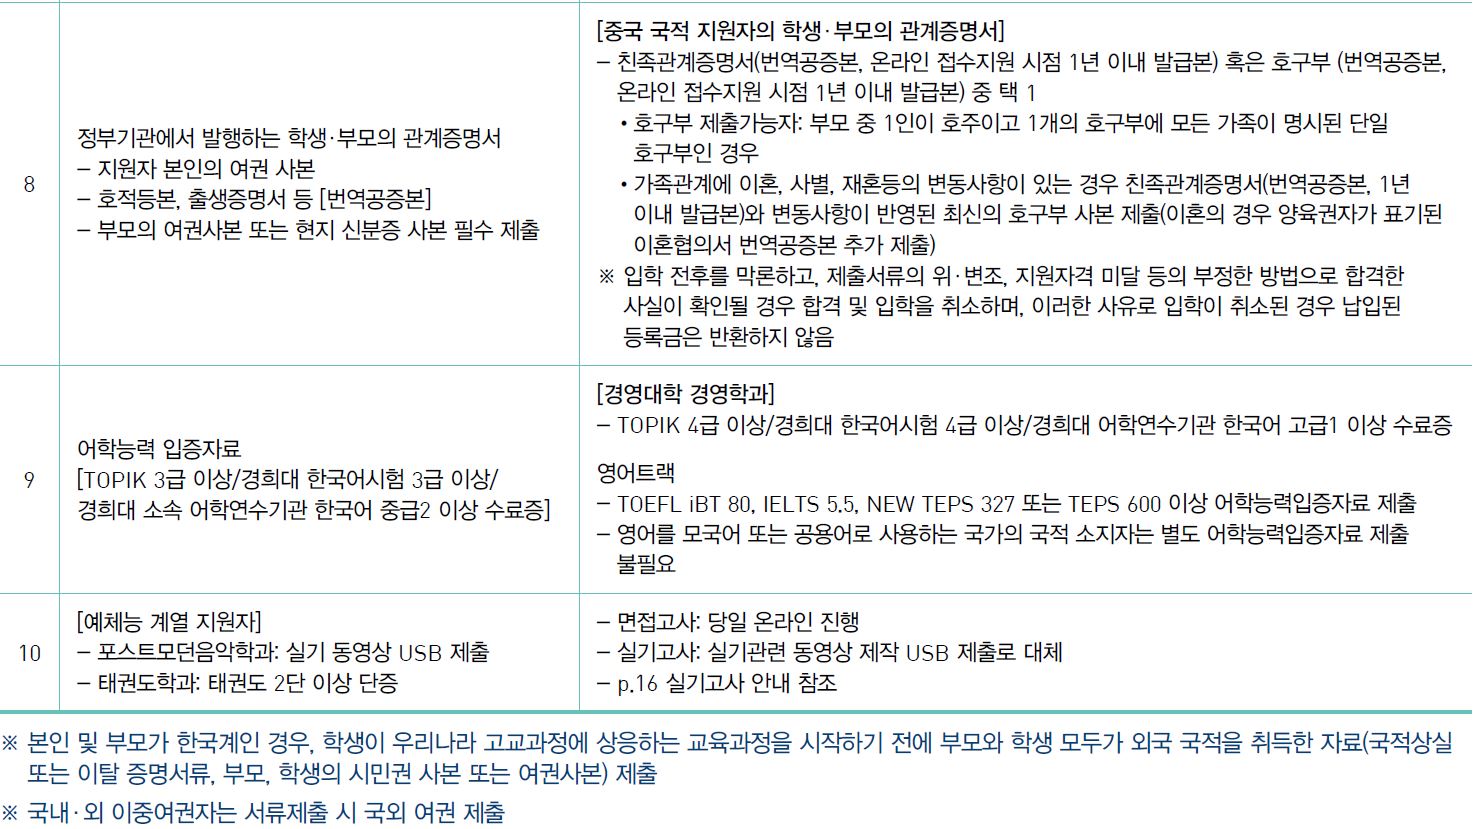 Kyung Hee University Foreign Student Admission Required Documents_English Version 경희대 외국인전형 제출서류_영어본_03_제출서류.JPG